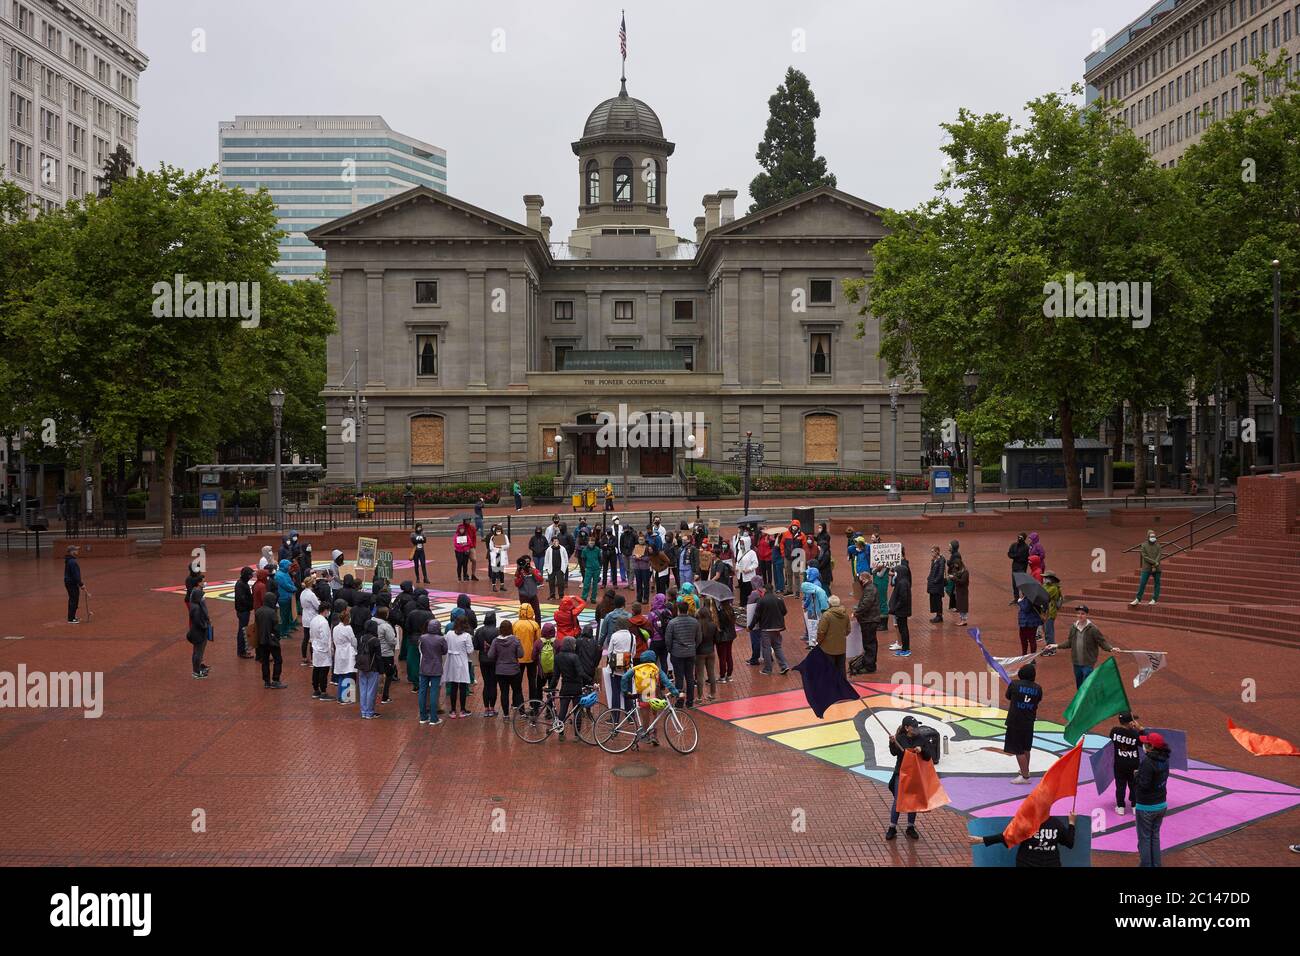 BLM demonstrators gather at the Pioneer Courthouse Square in downtown Portland, Oregon, on Saturday, Jun 13, 2020. Stock Photo